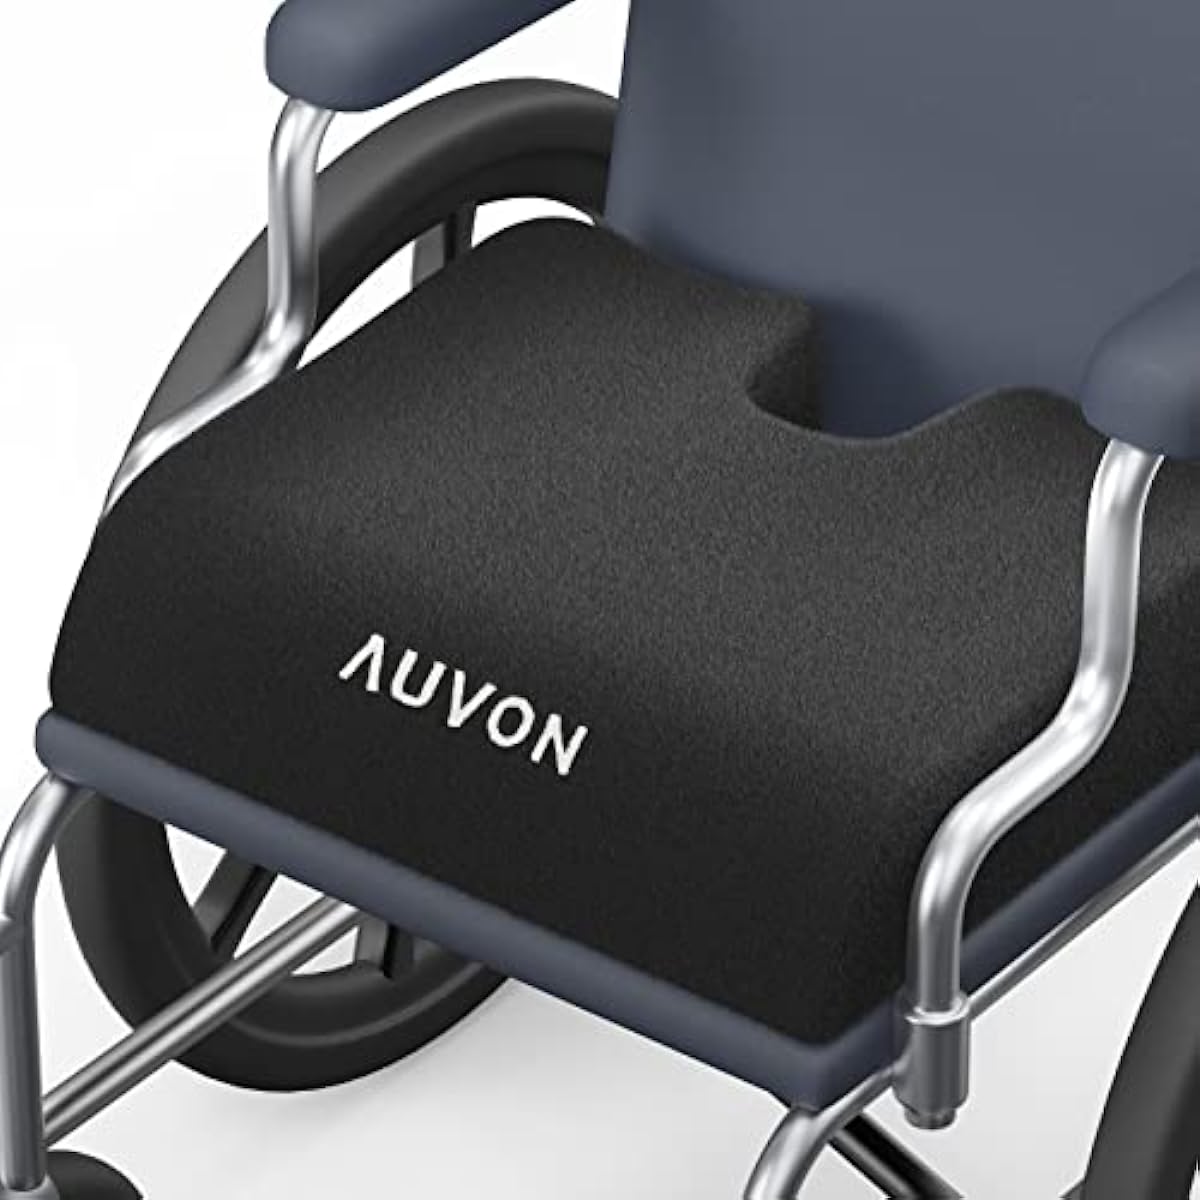 AUVON Wheelchair Seat Cushions for Sciatica, Back, Coccyx, Pressure Sore and Ulcer Pain Relief, Memory Foam Pressure Relief Cushion with Detachable Safety Strap, Breathable Fabric, Waterproof Fabric